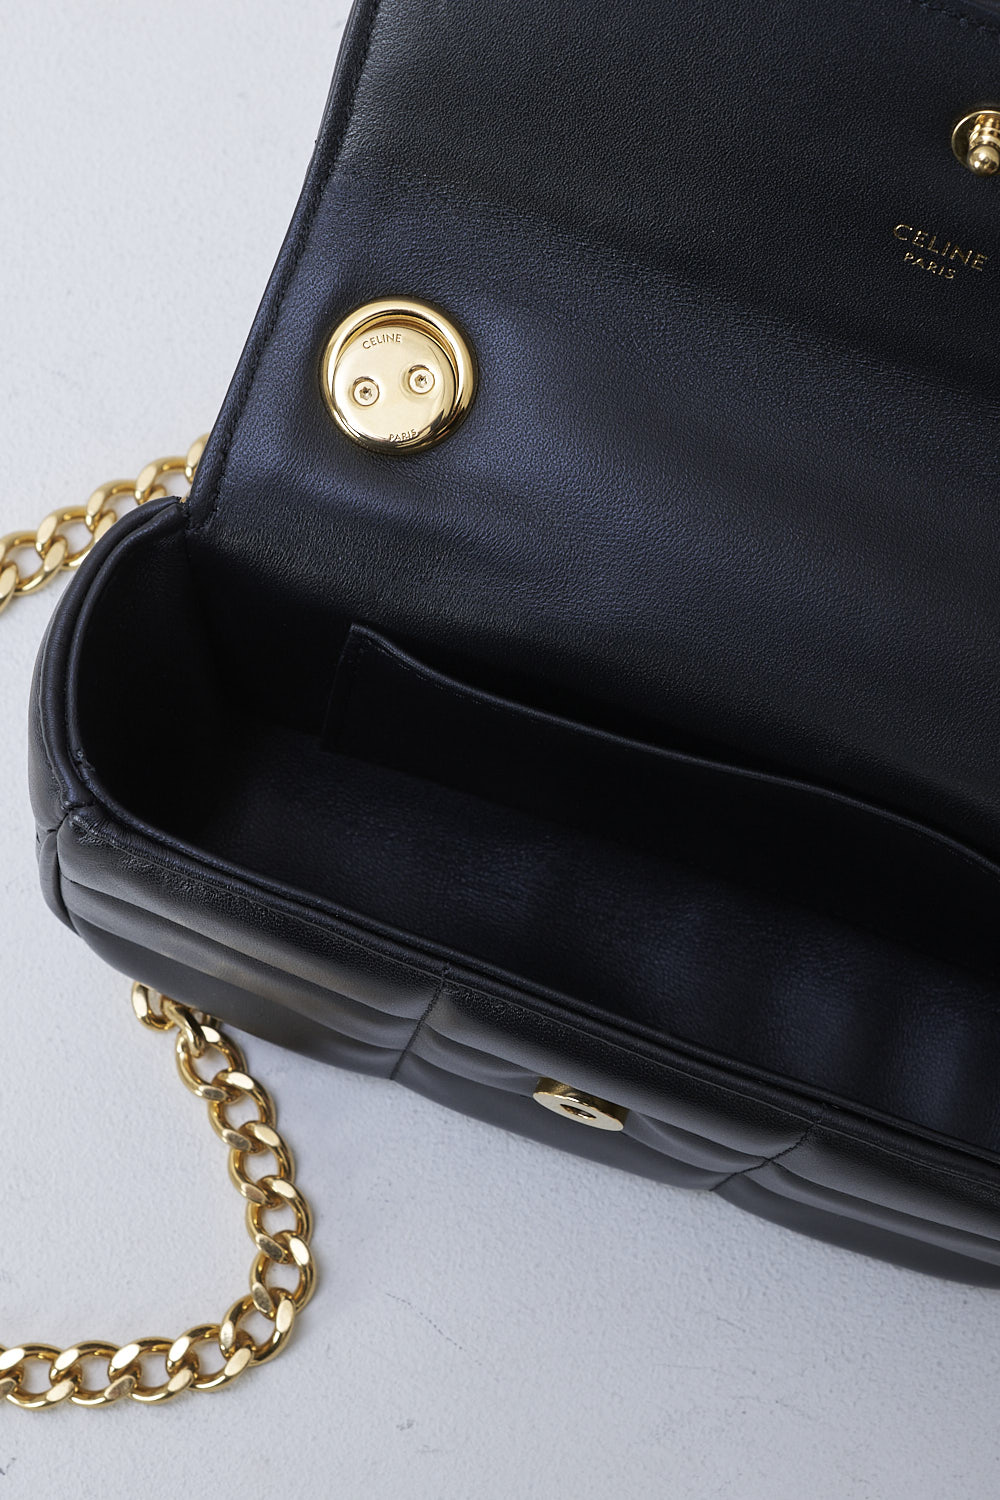 CELINE, BLACK MATELASSÃ‰ MINI CHAIN SHOULDER BAG, 10L333EWJ_38NO, Black, Detail 1, This black matelassÃ© mini shoulder bag has gold-tone metal hardware with the brand's lettering on the front and a gold chain shoulder strap. The bag has a snap button closure. The flap opens to the main compartment with a inner pocket to the backside.  
